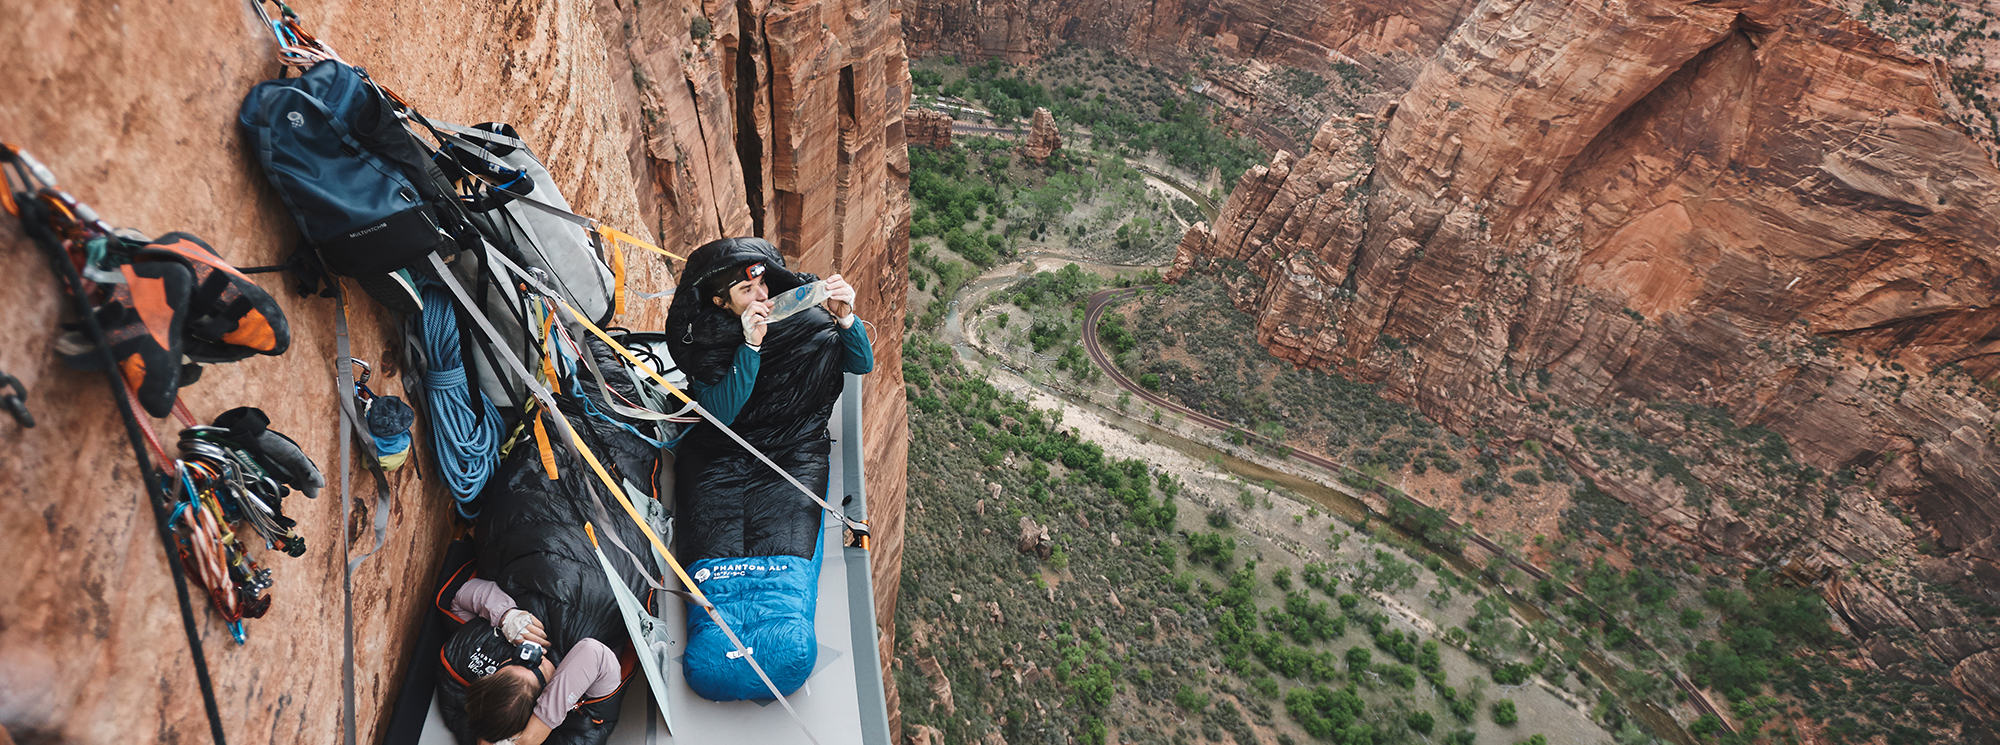 On a portal ledge in Zion National Park, Ethan and his climbing partner take in the views from their sleeping bags at dawn